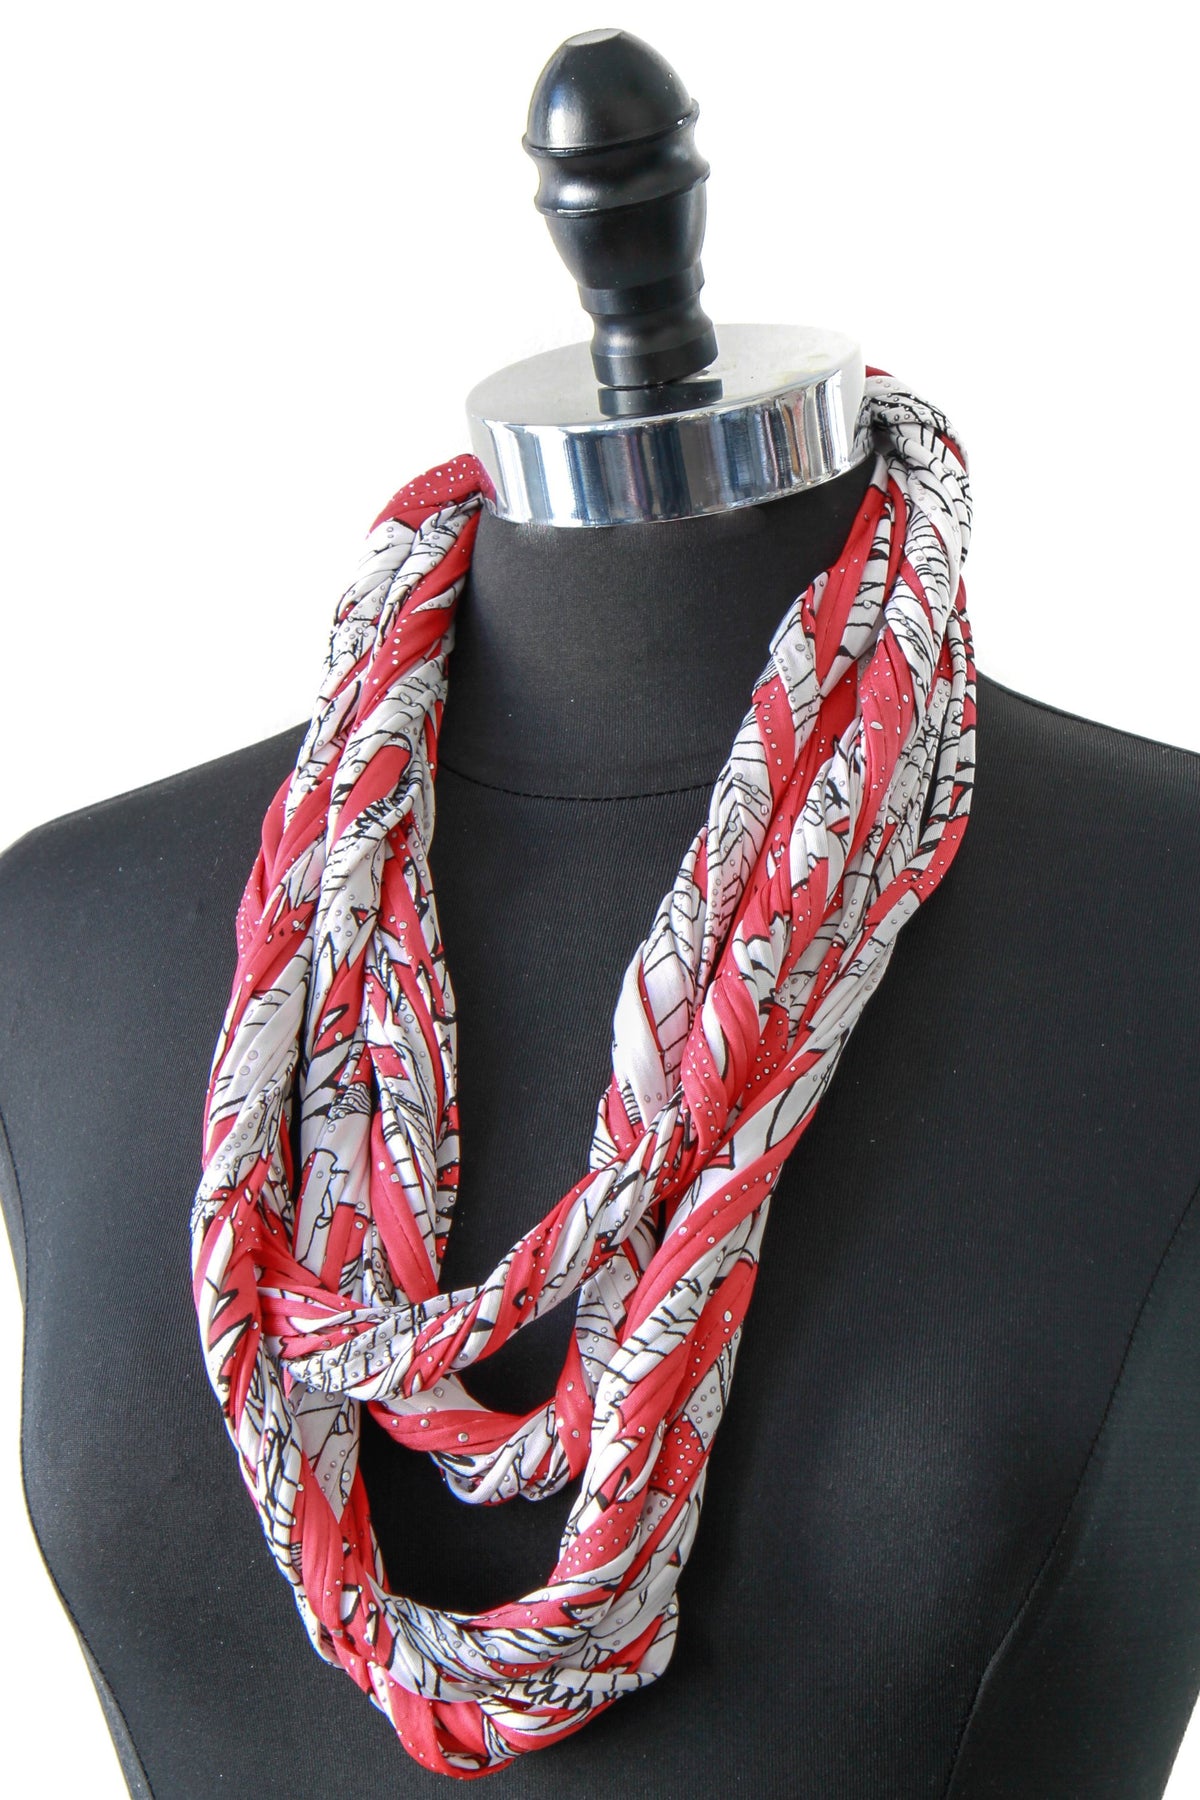 Red infinity Scarf in Poinsettia Print